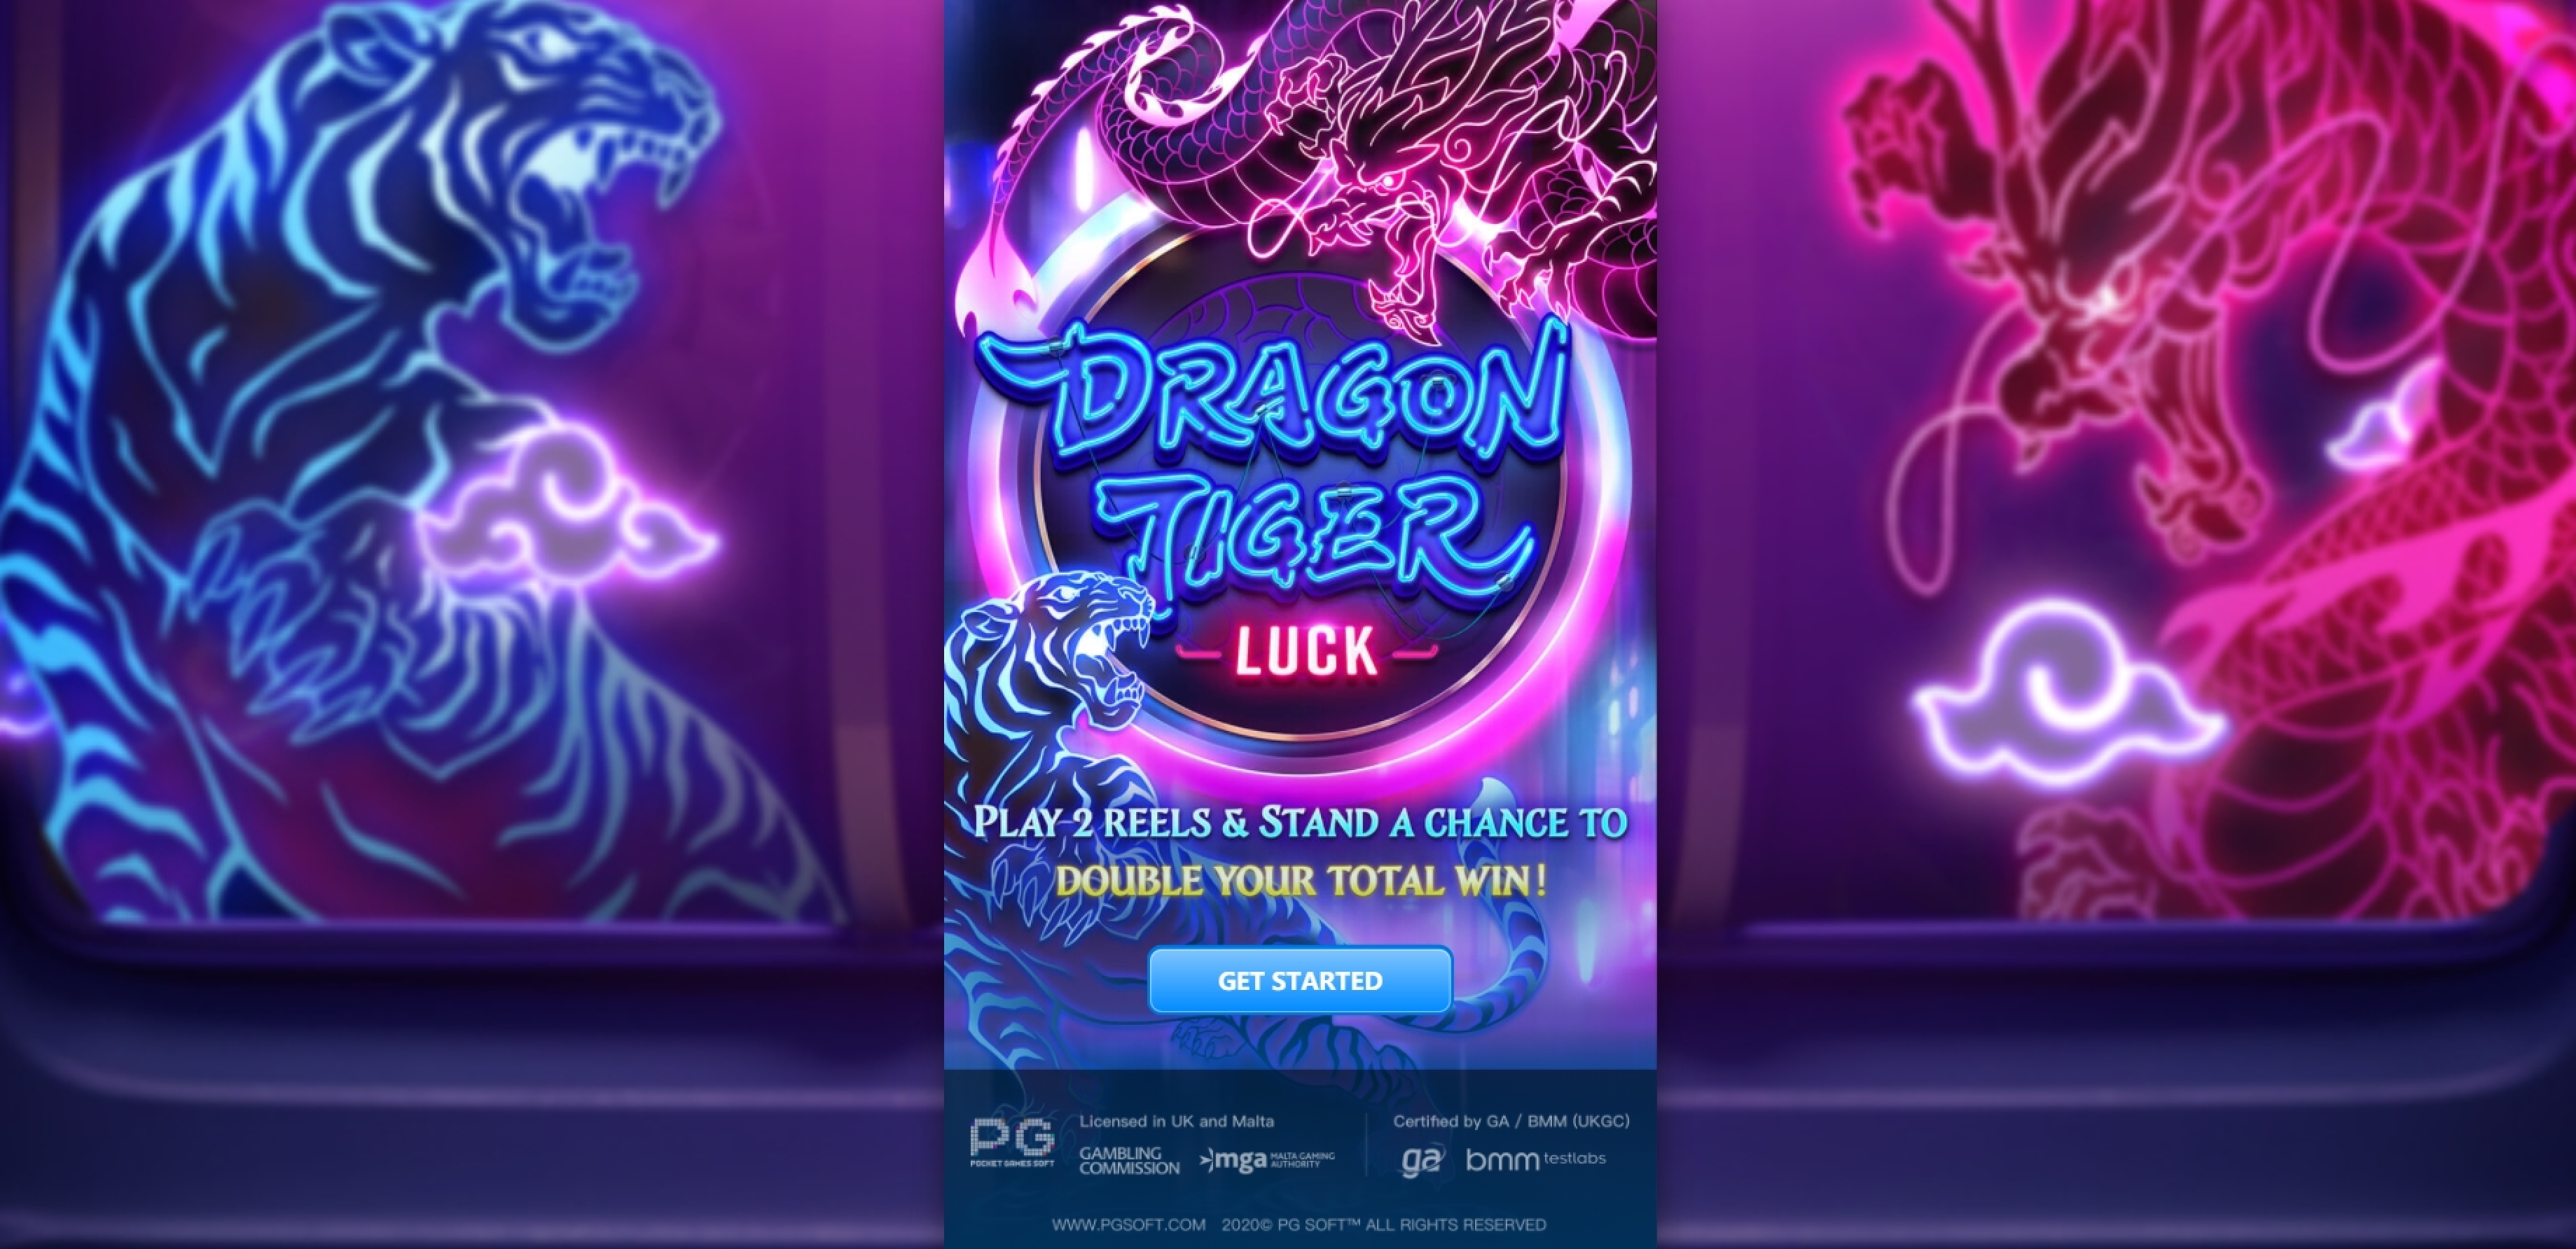 Play Dragon Tiger Luck Free Casino Slot Game by PG Soft